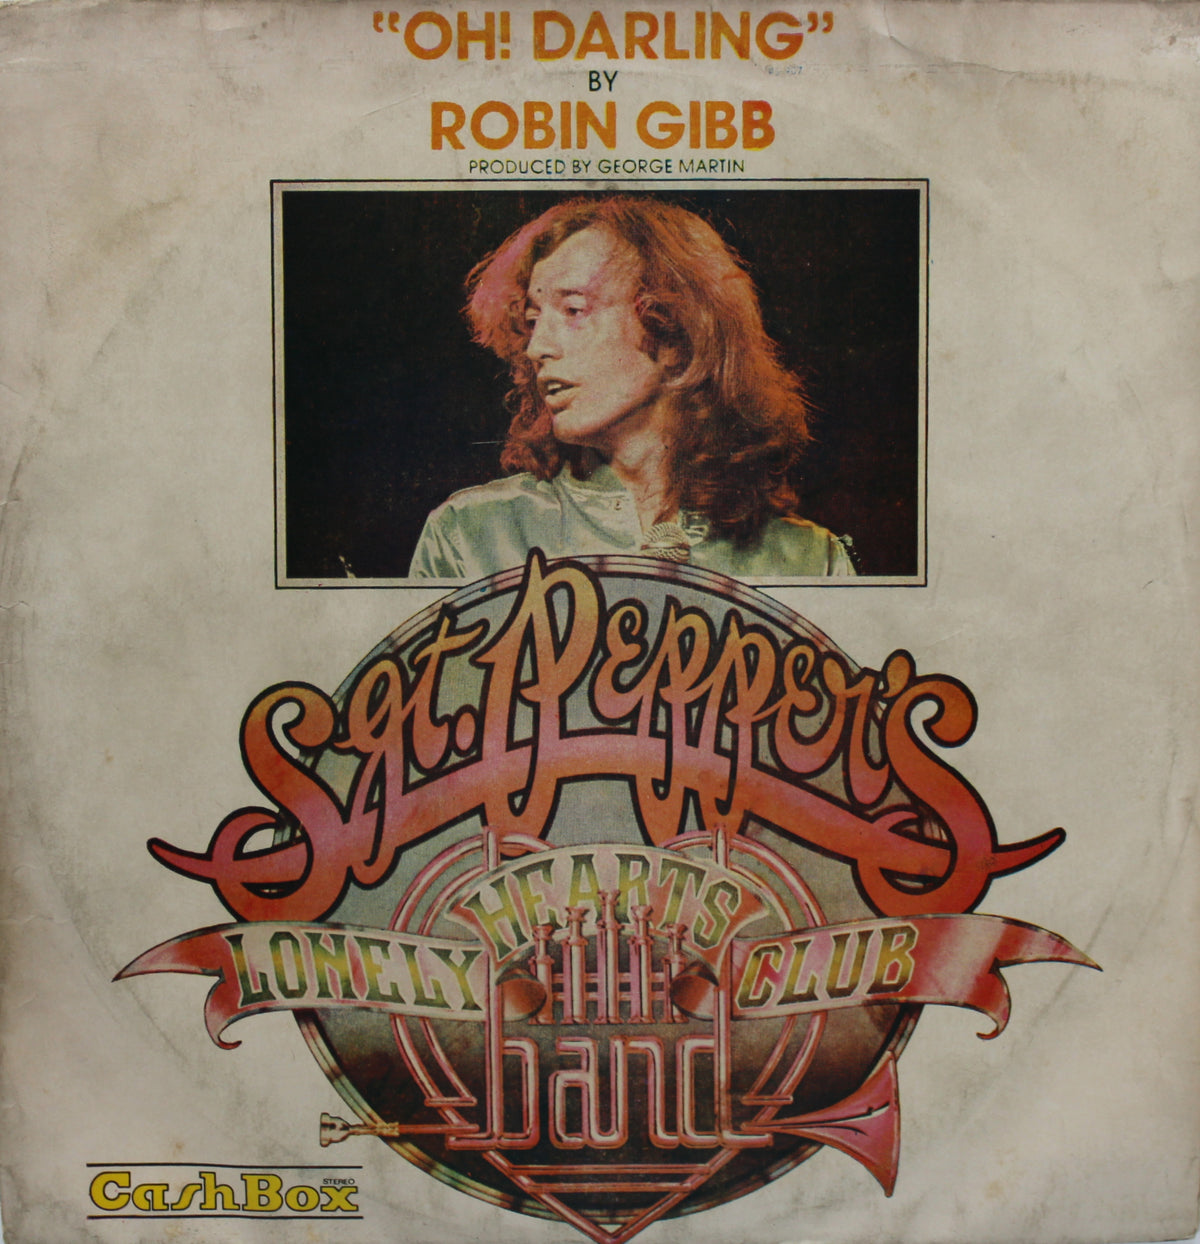 Robin Gibb (Bee Gees) - &quot;Oh! Darling&quot;, Sgt. Peppers Lonely Hearts Club, Thailand